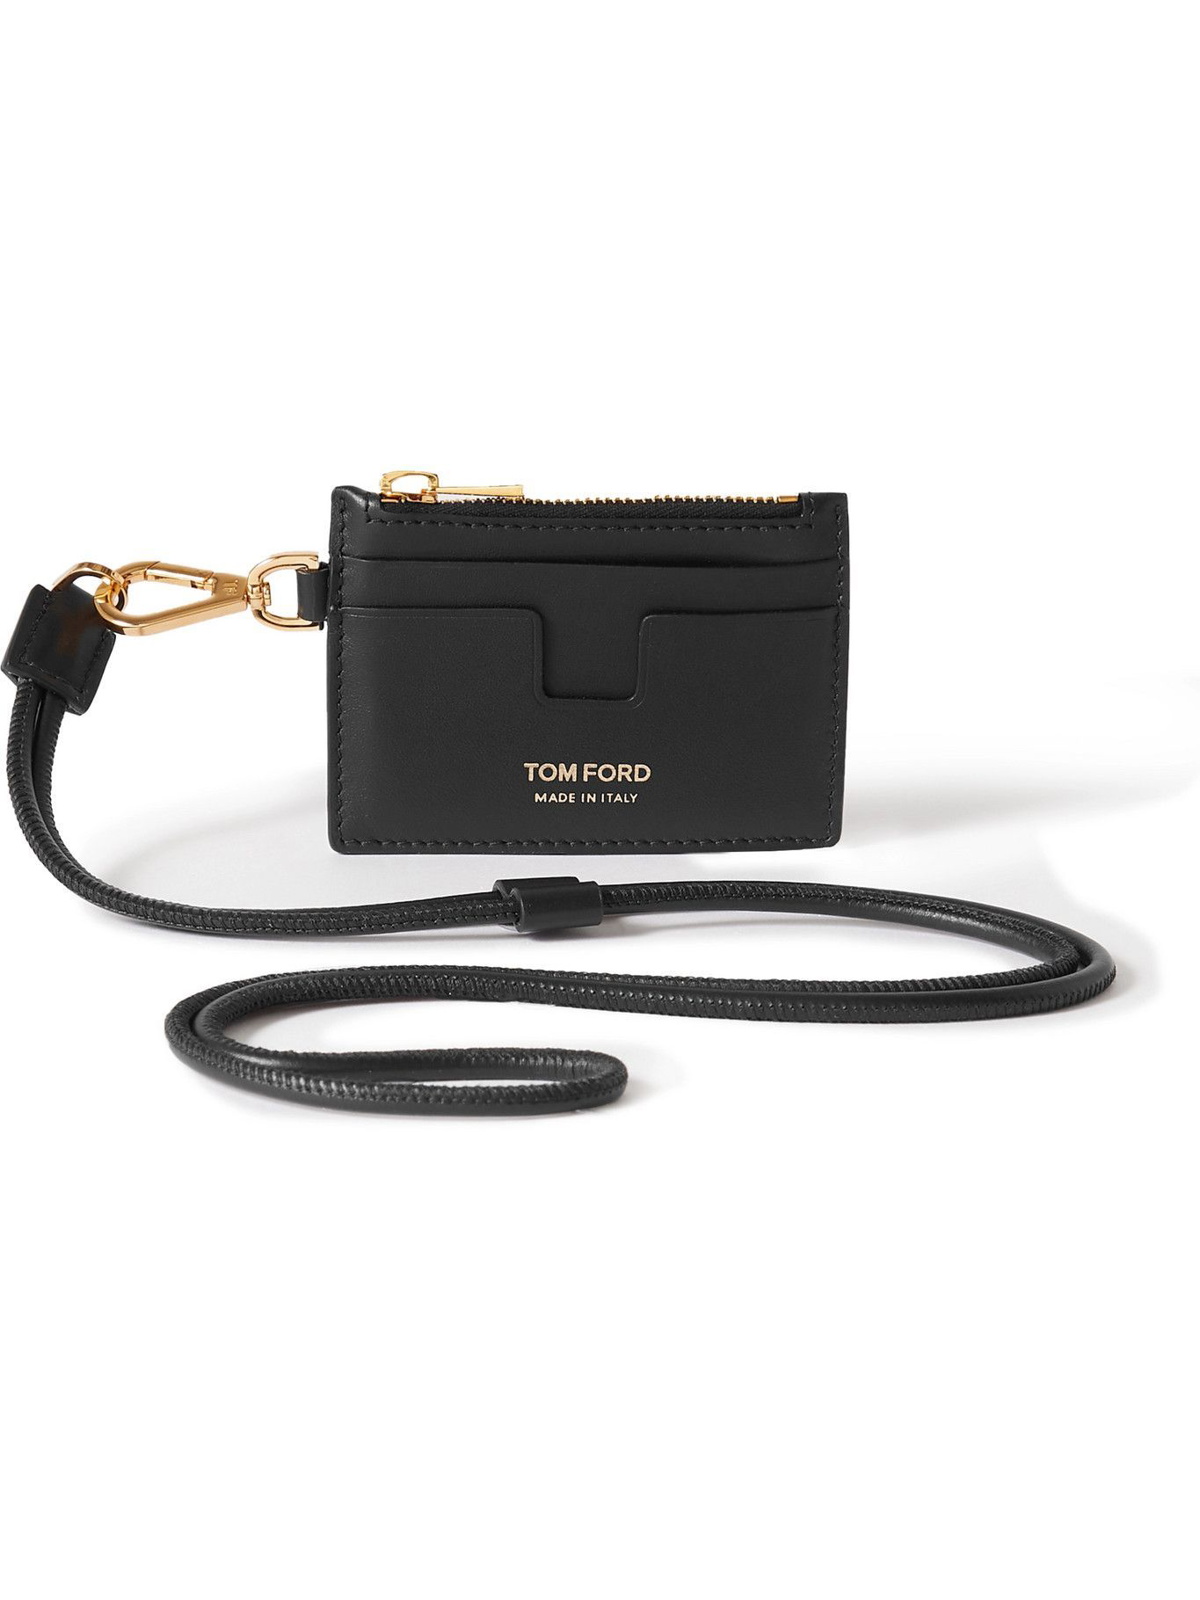 TOM FORD - Leather Zipped Cardholder with Lanyard TOM FORD